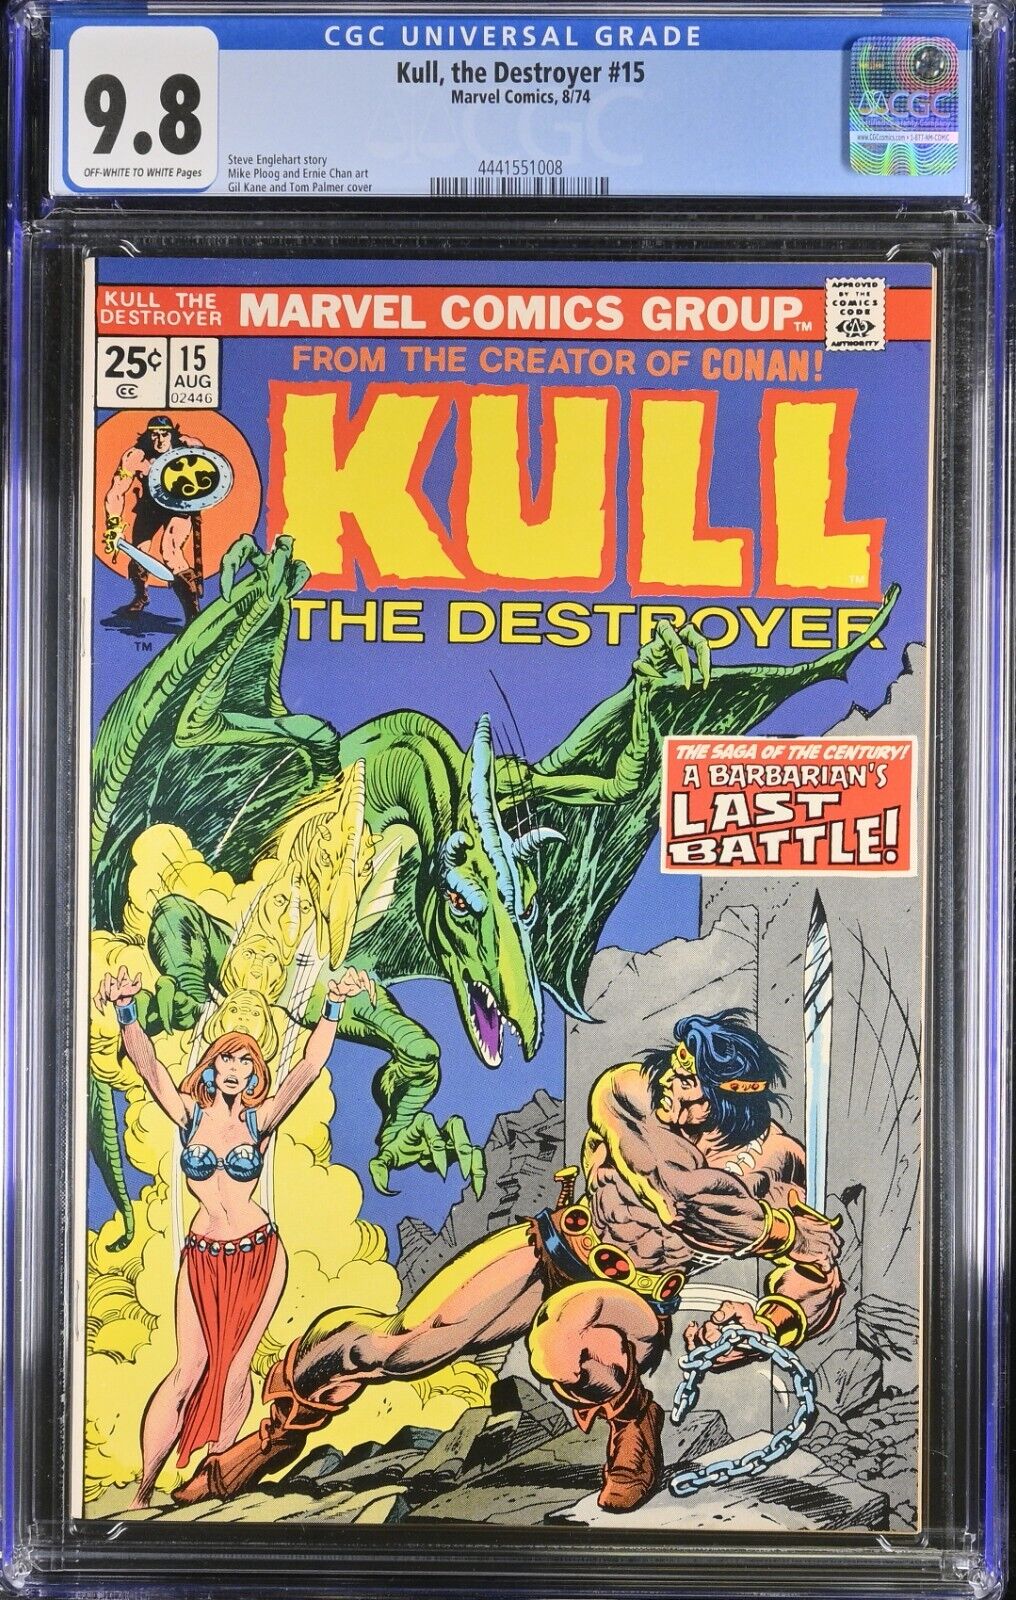 KULL THE DESTROYER #15 - CGC 9.8 - OW/WP  - NM/MT - GIL KANE COVER